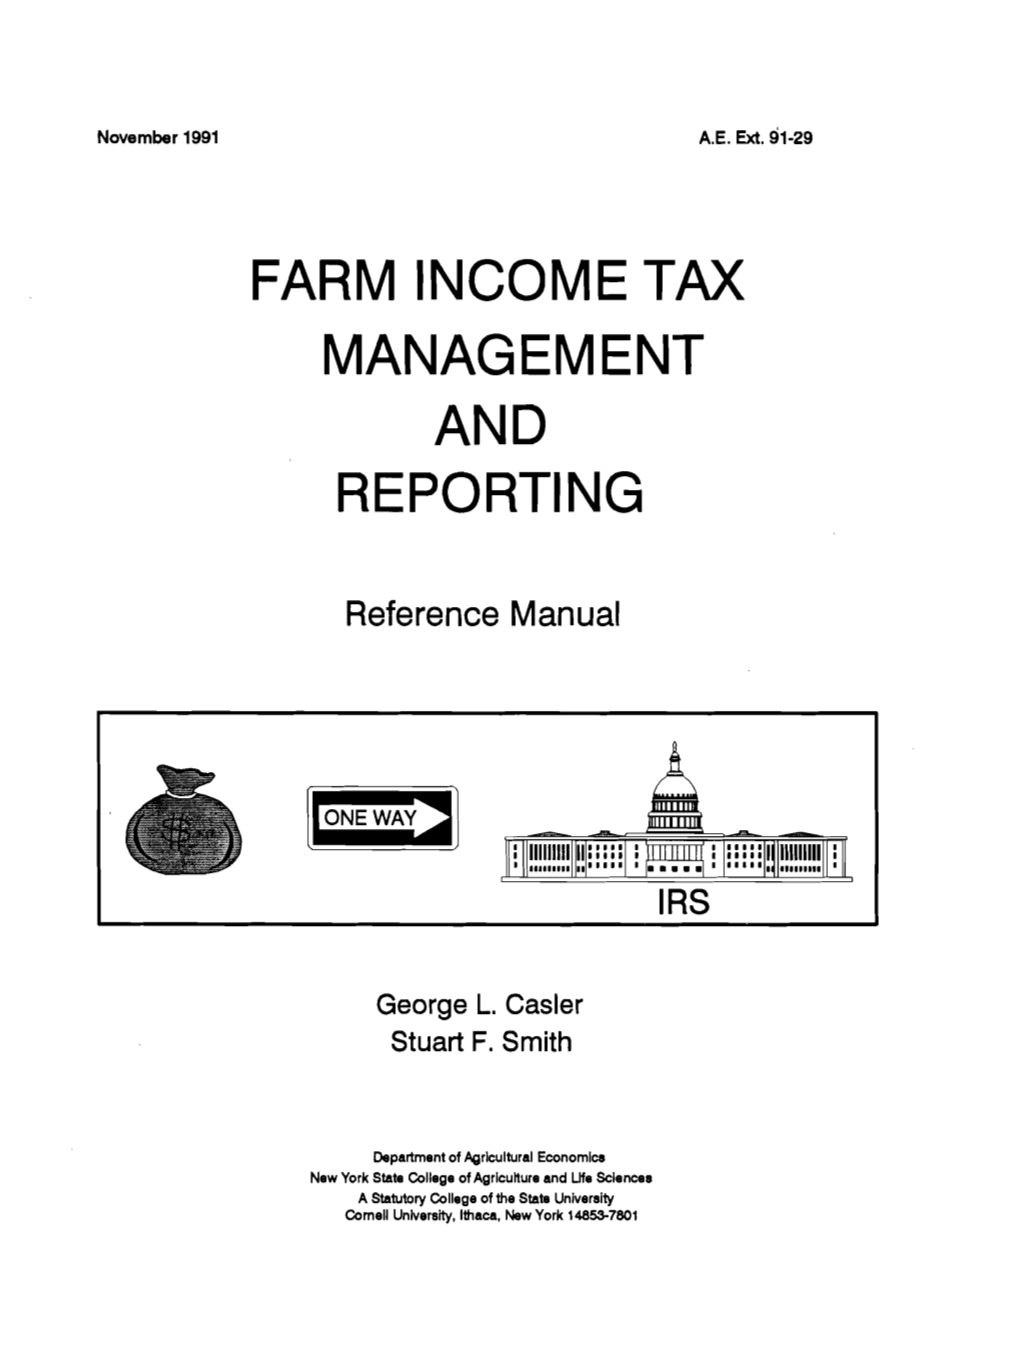 Farm Income Tax Management and Reporting